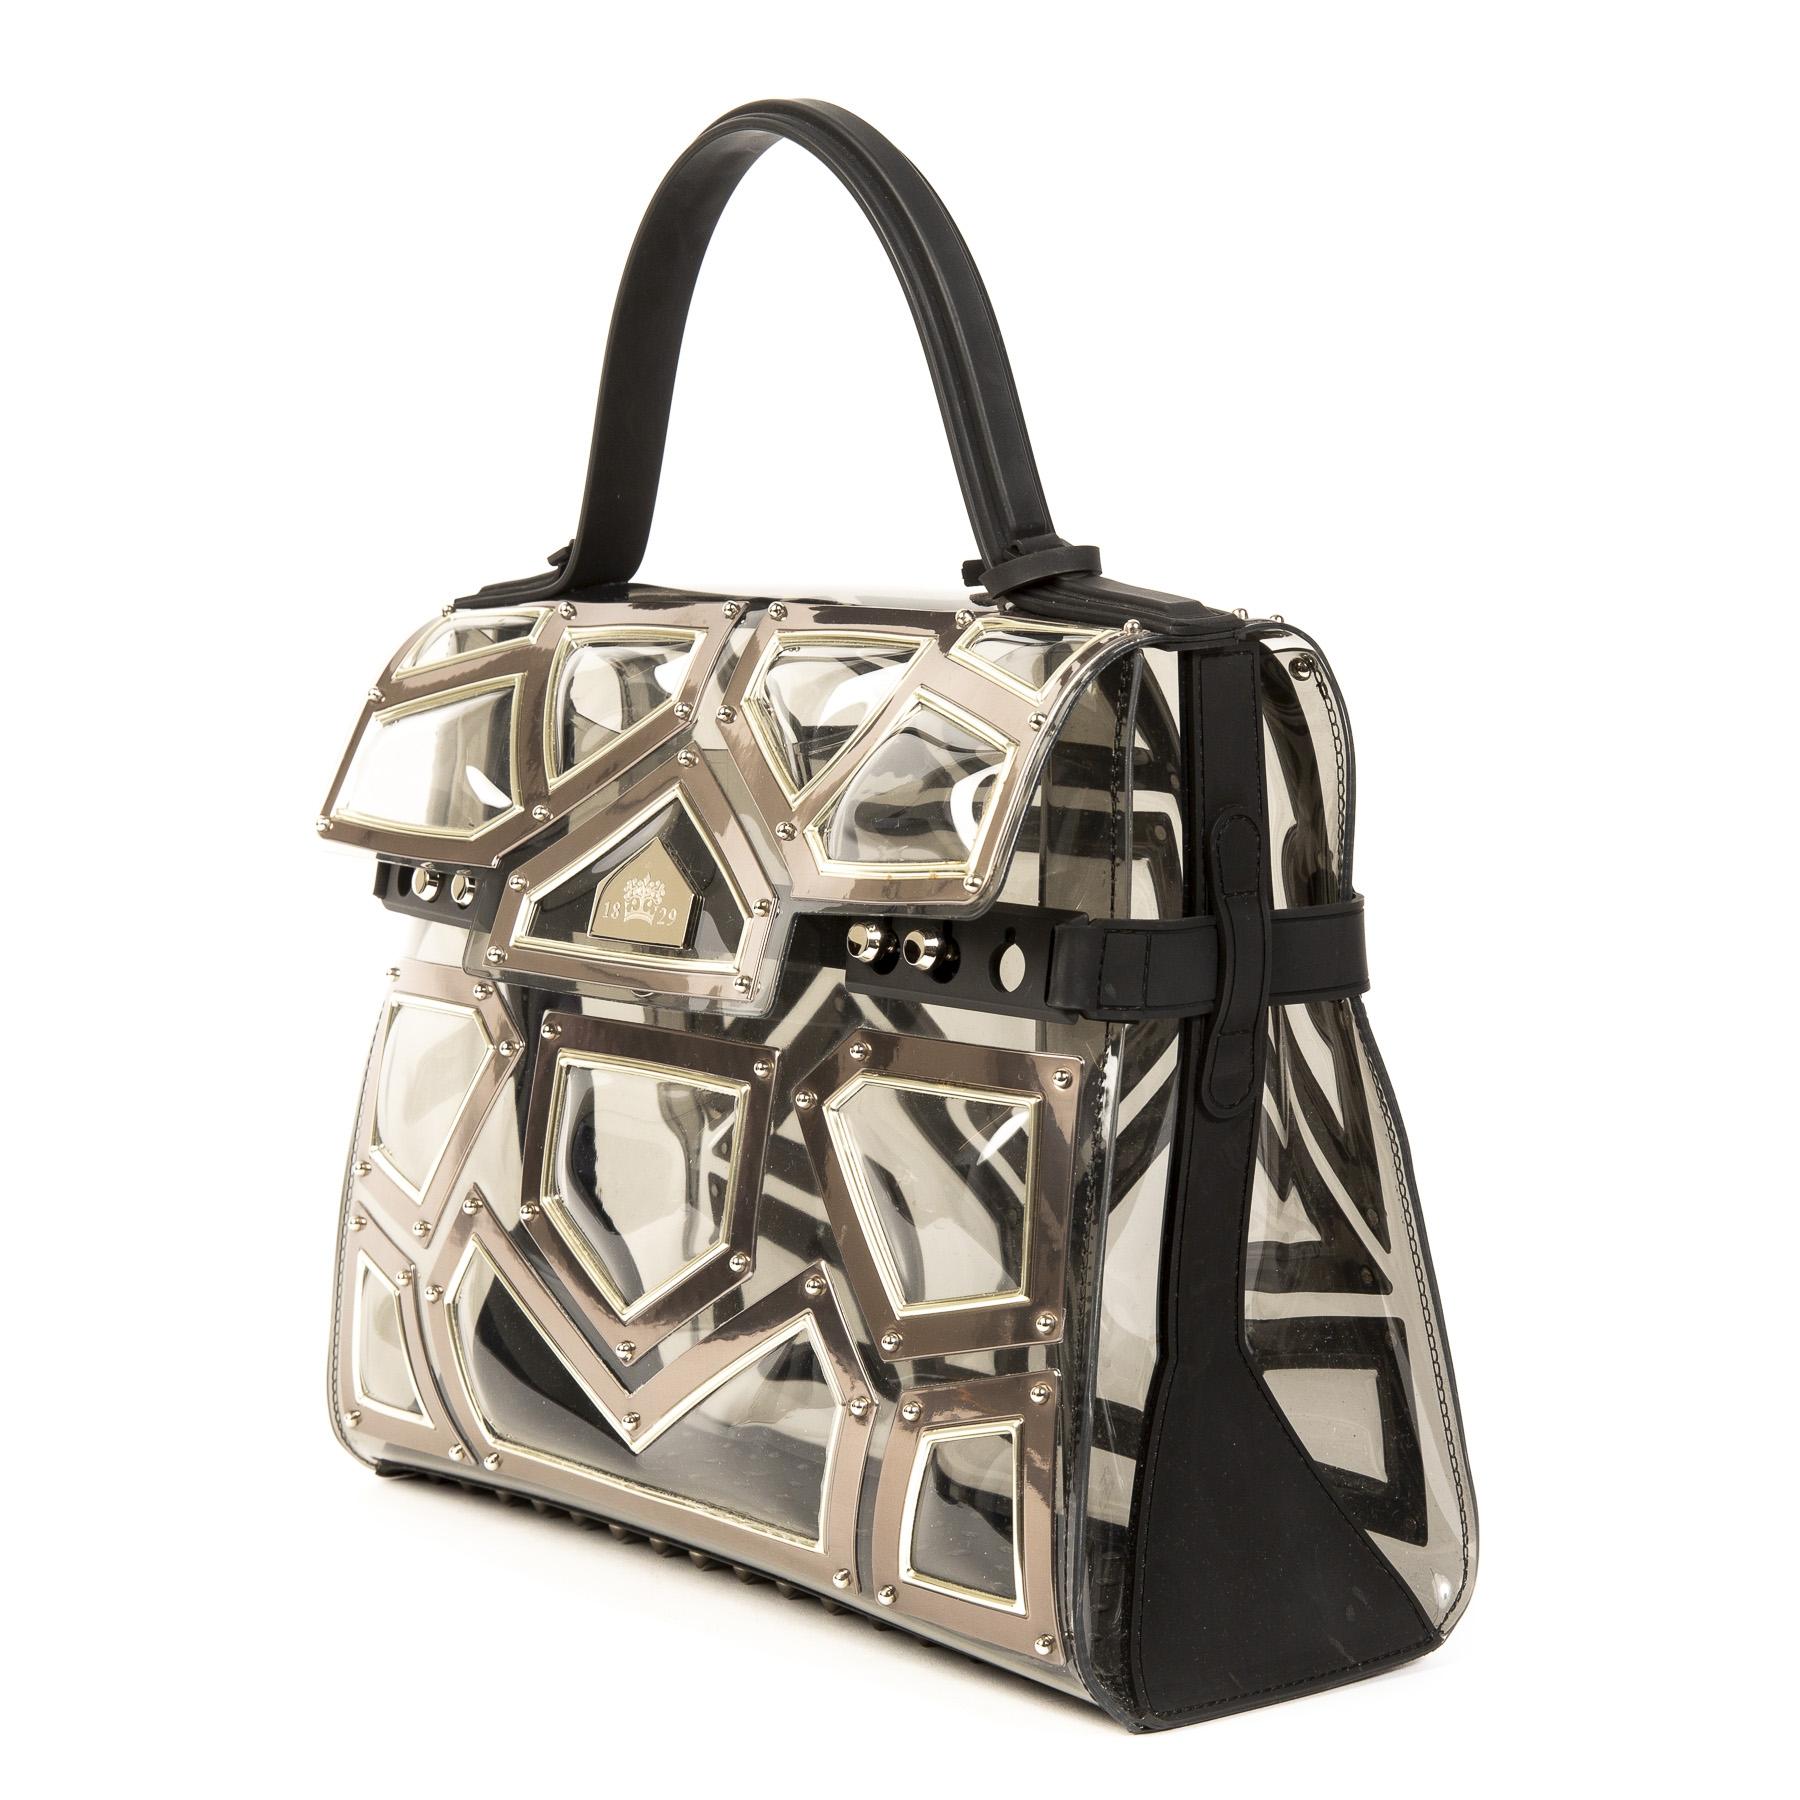 Limited Edition

Delvaux Tempête Le Gladiator Limited Edition

This Tempête Gladiator was constructed with 15 moulds of differently sized scales which took an entire year to develop and perfect. The result is a sturdy looking bag, with a shell-like